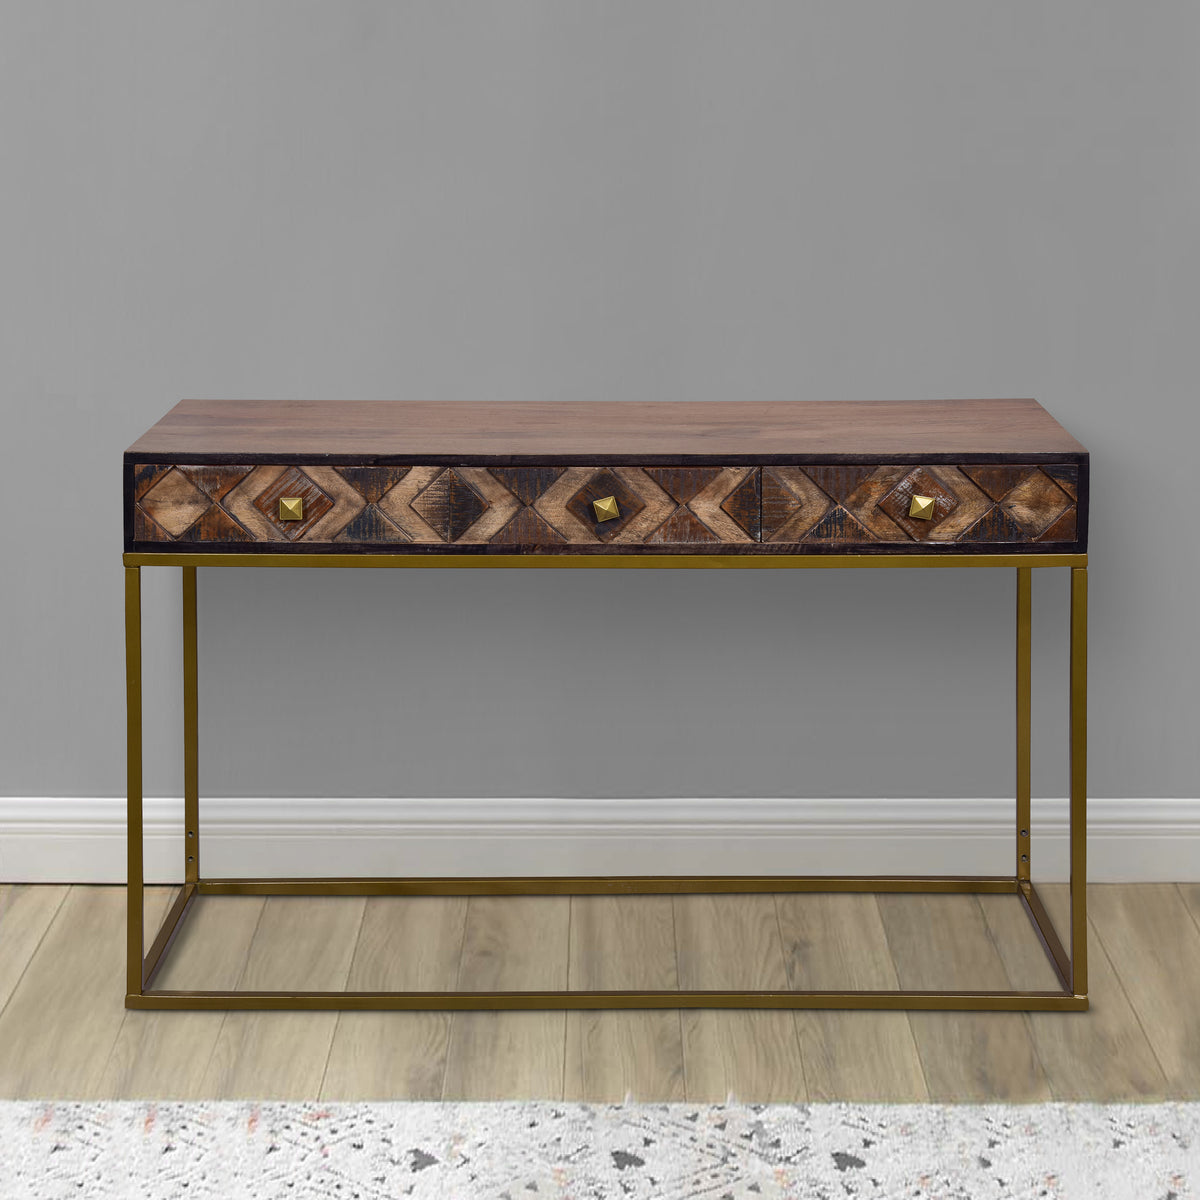 51-inch console table